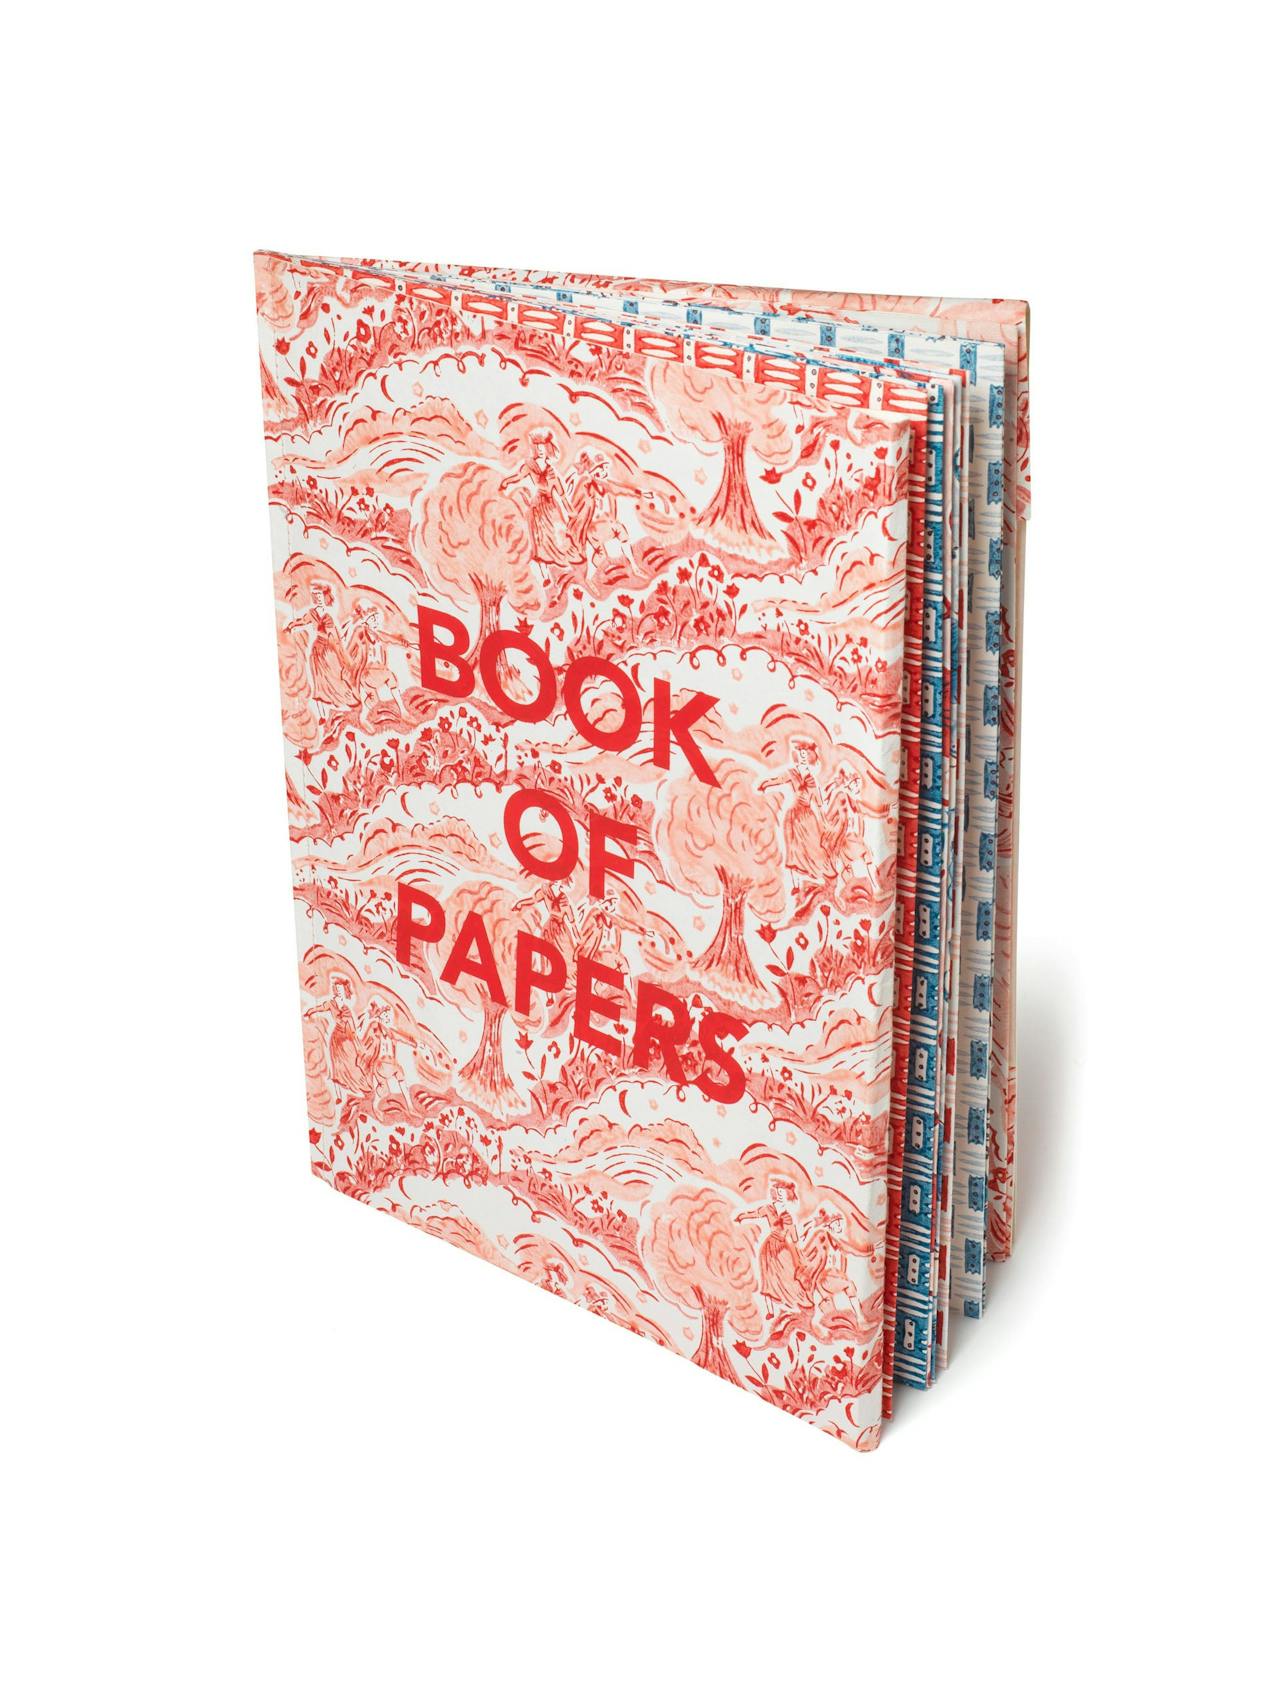 Book of papers